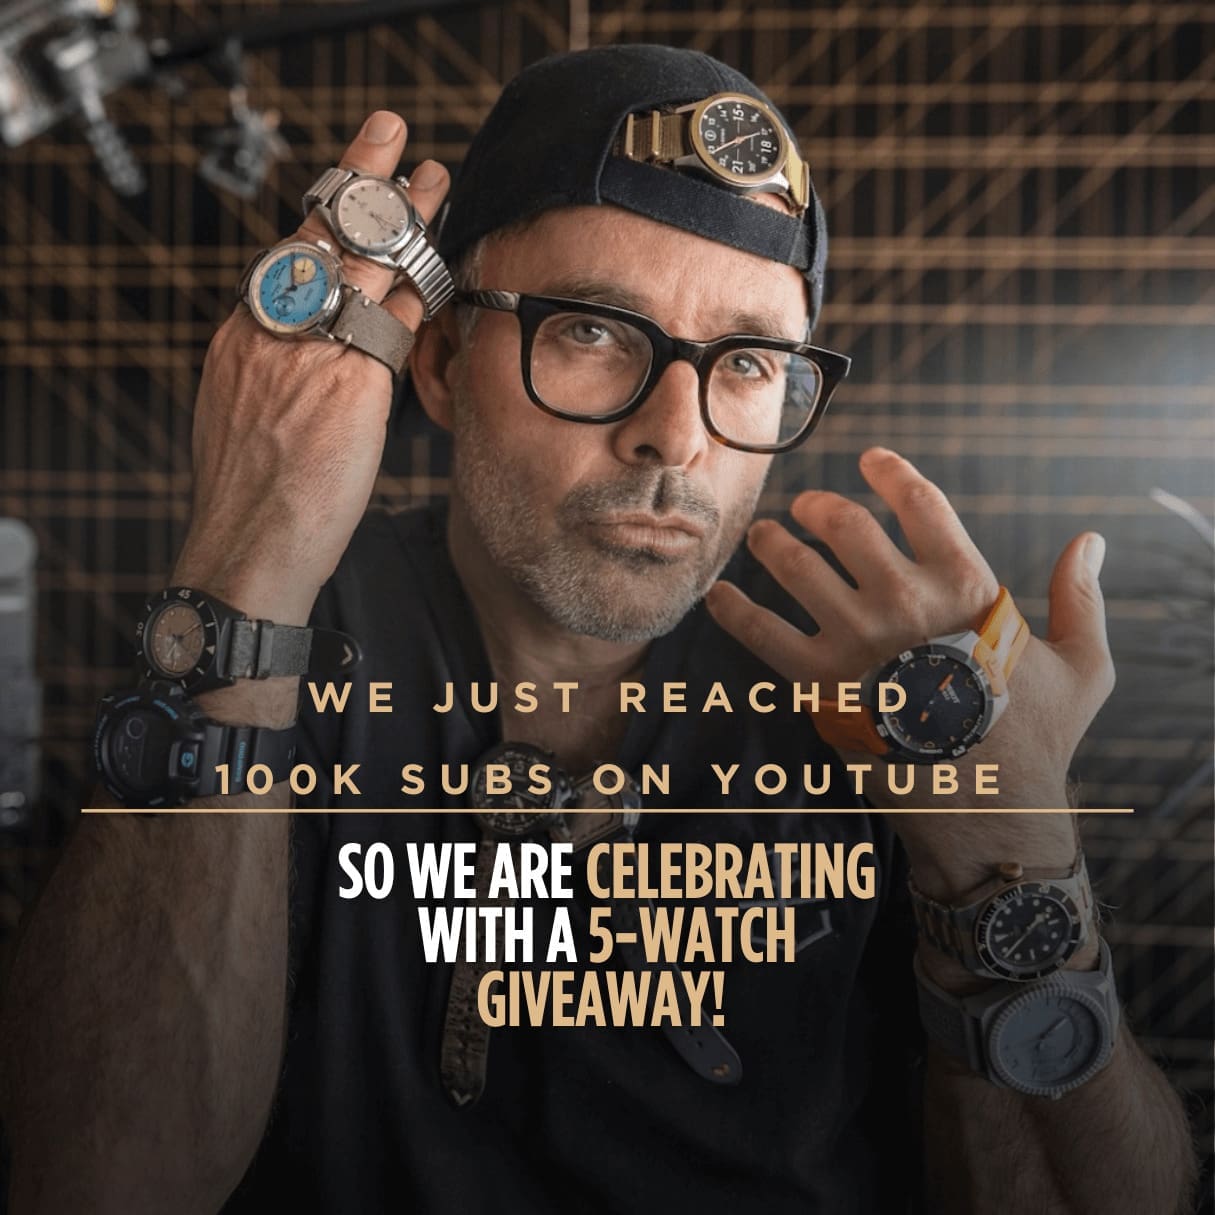 We just reached 100K subs on YouTube! So we’re celebrating with a 5 WATCH GIVEAWAY. Here is how to enter…